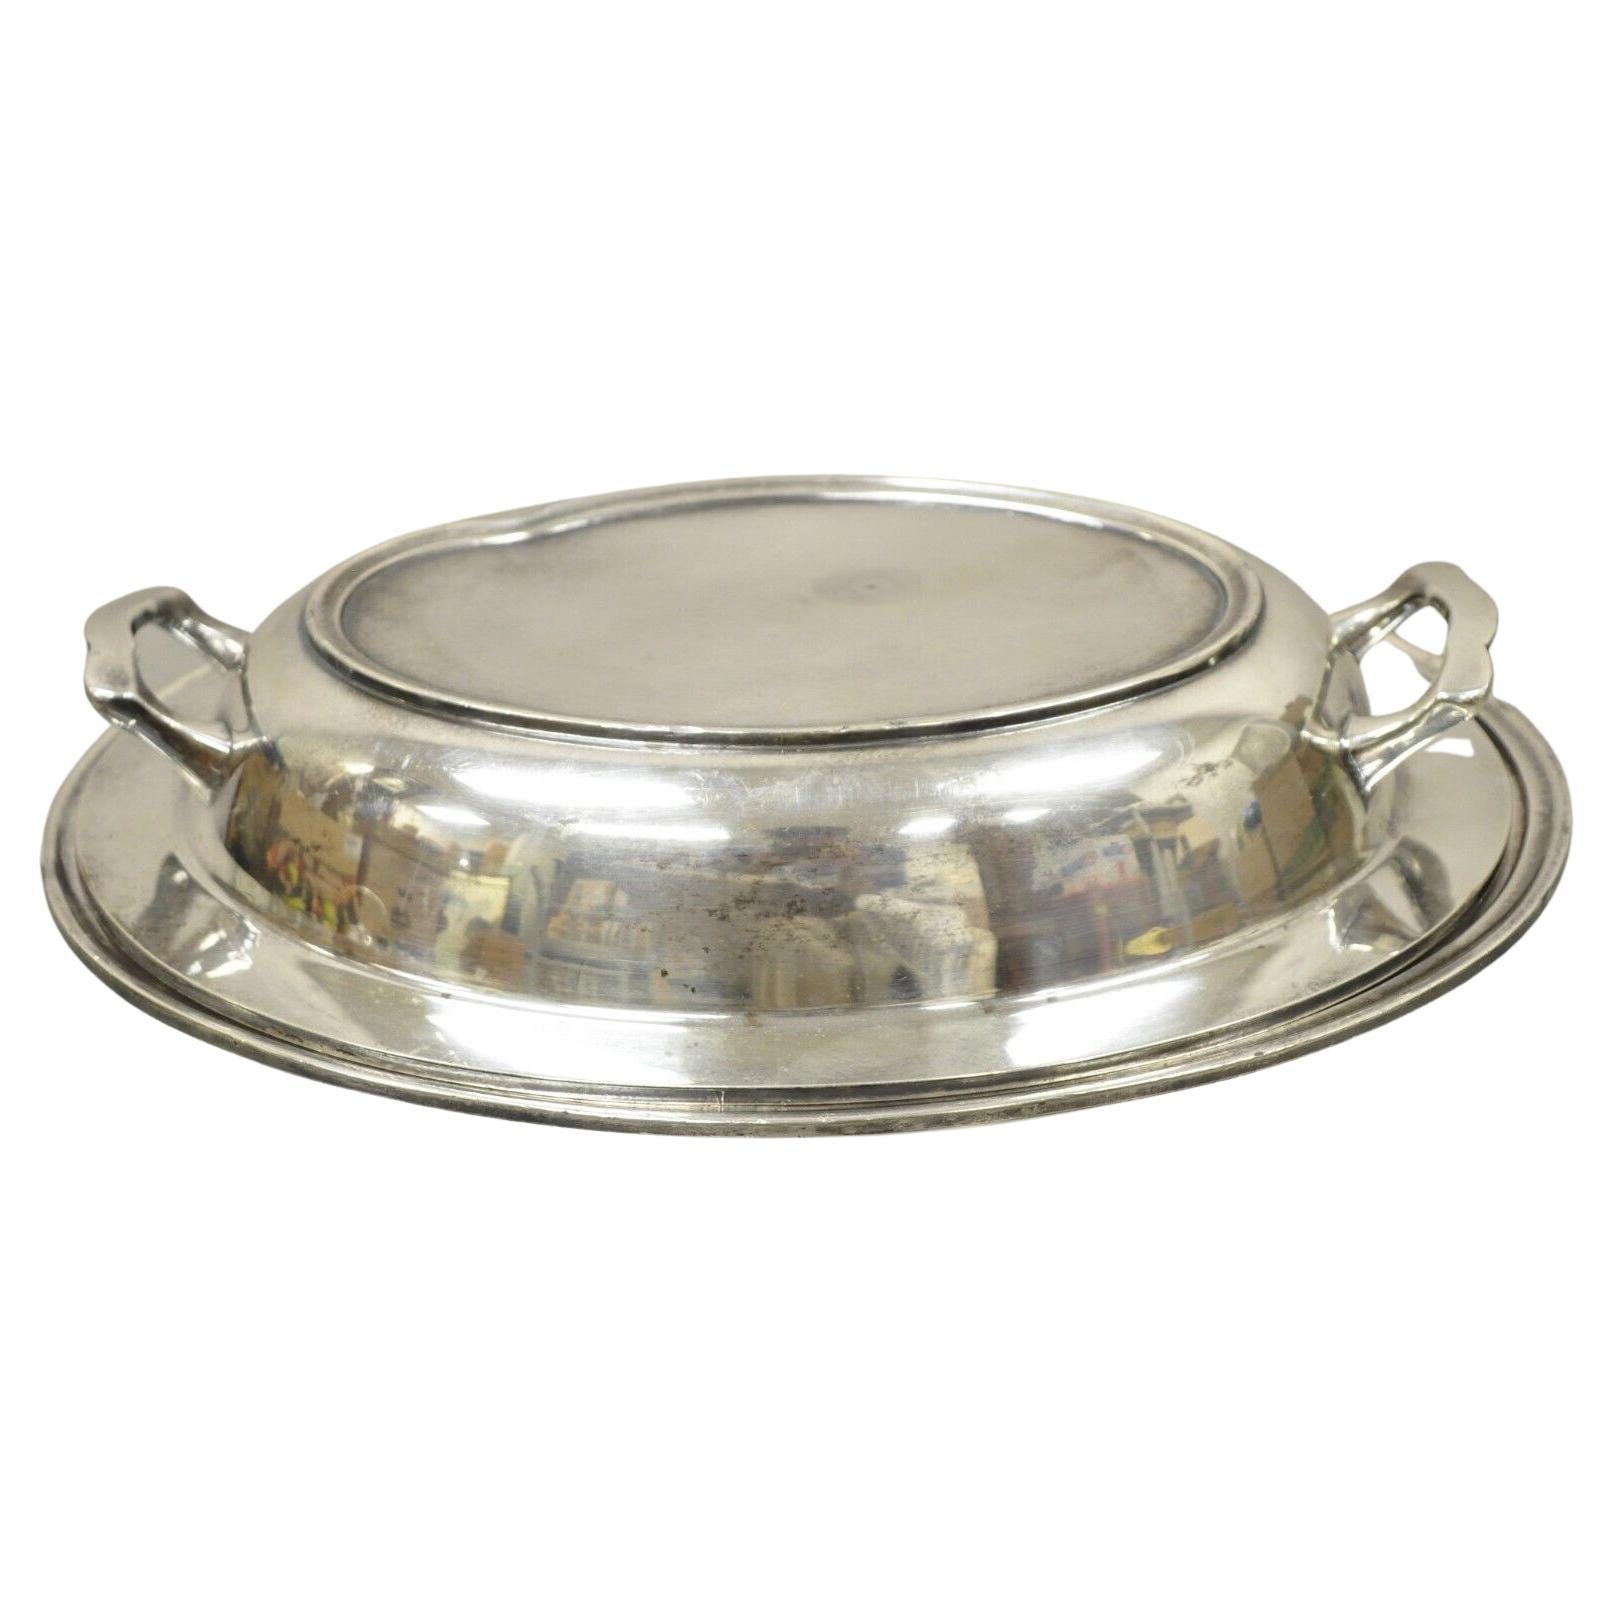 Vintage Cheshire S.P.C. 846 Silver Plated Covered Vegetable Serving Dish For Sale